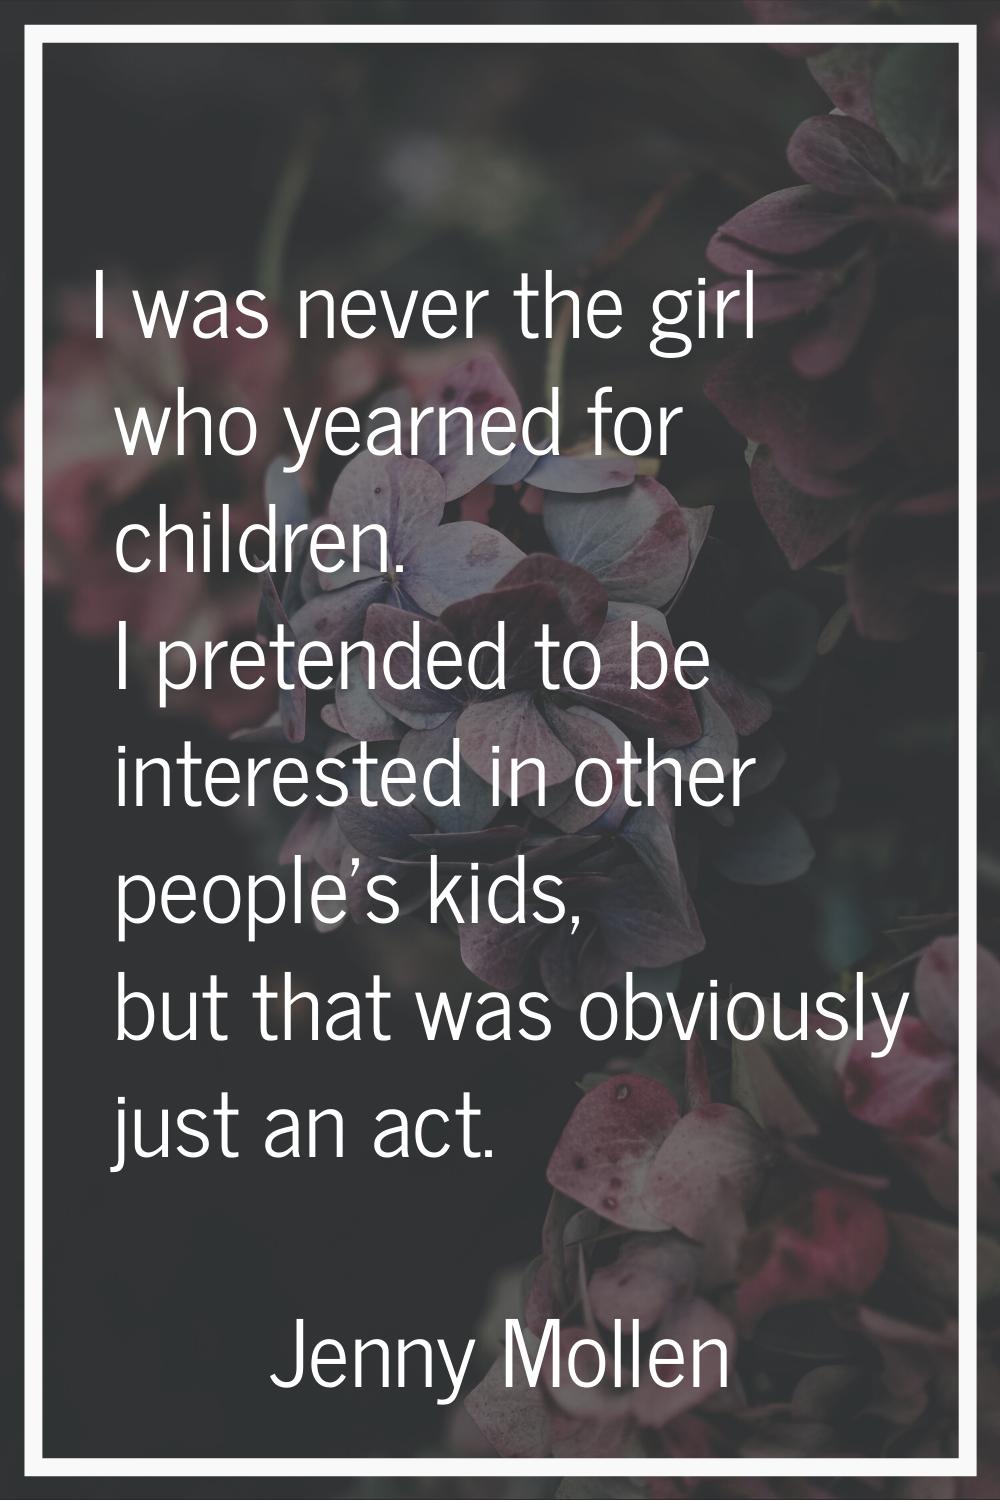 I was never the girl who yearned for children. I pretended to be interested in other people's kids,